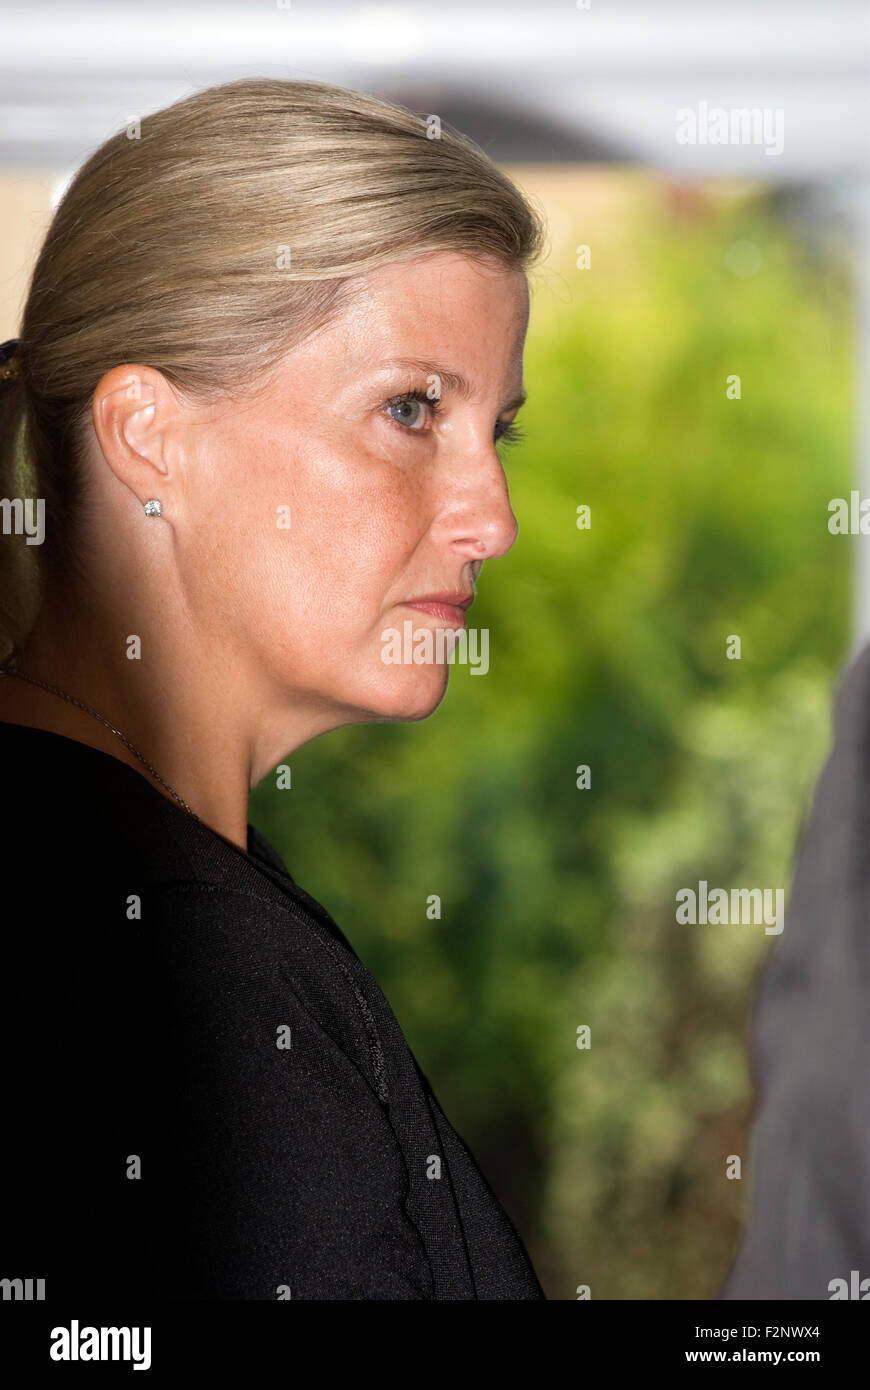 HRH the Countess of Wessex during her visit to Treloar School and College (a special school for children... Stock Photo